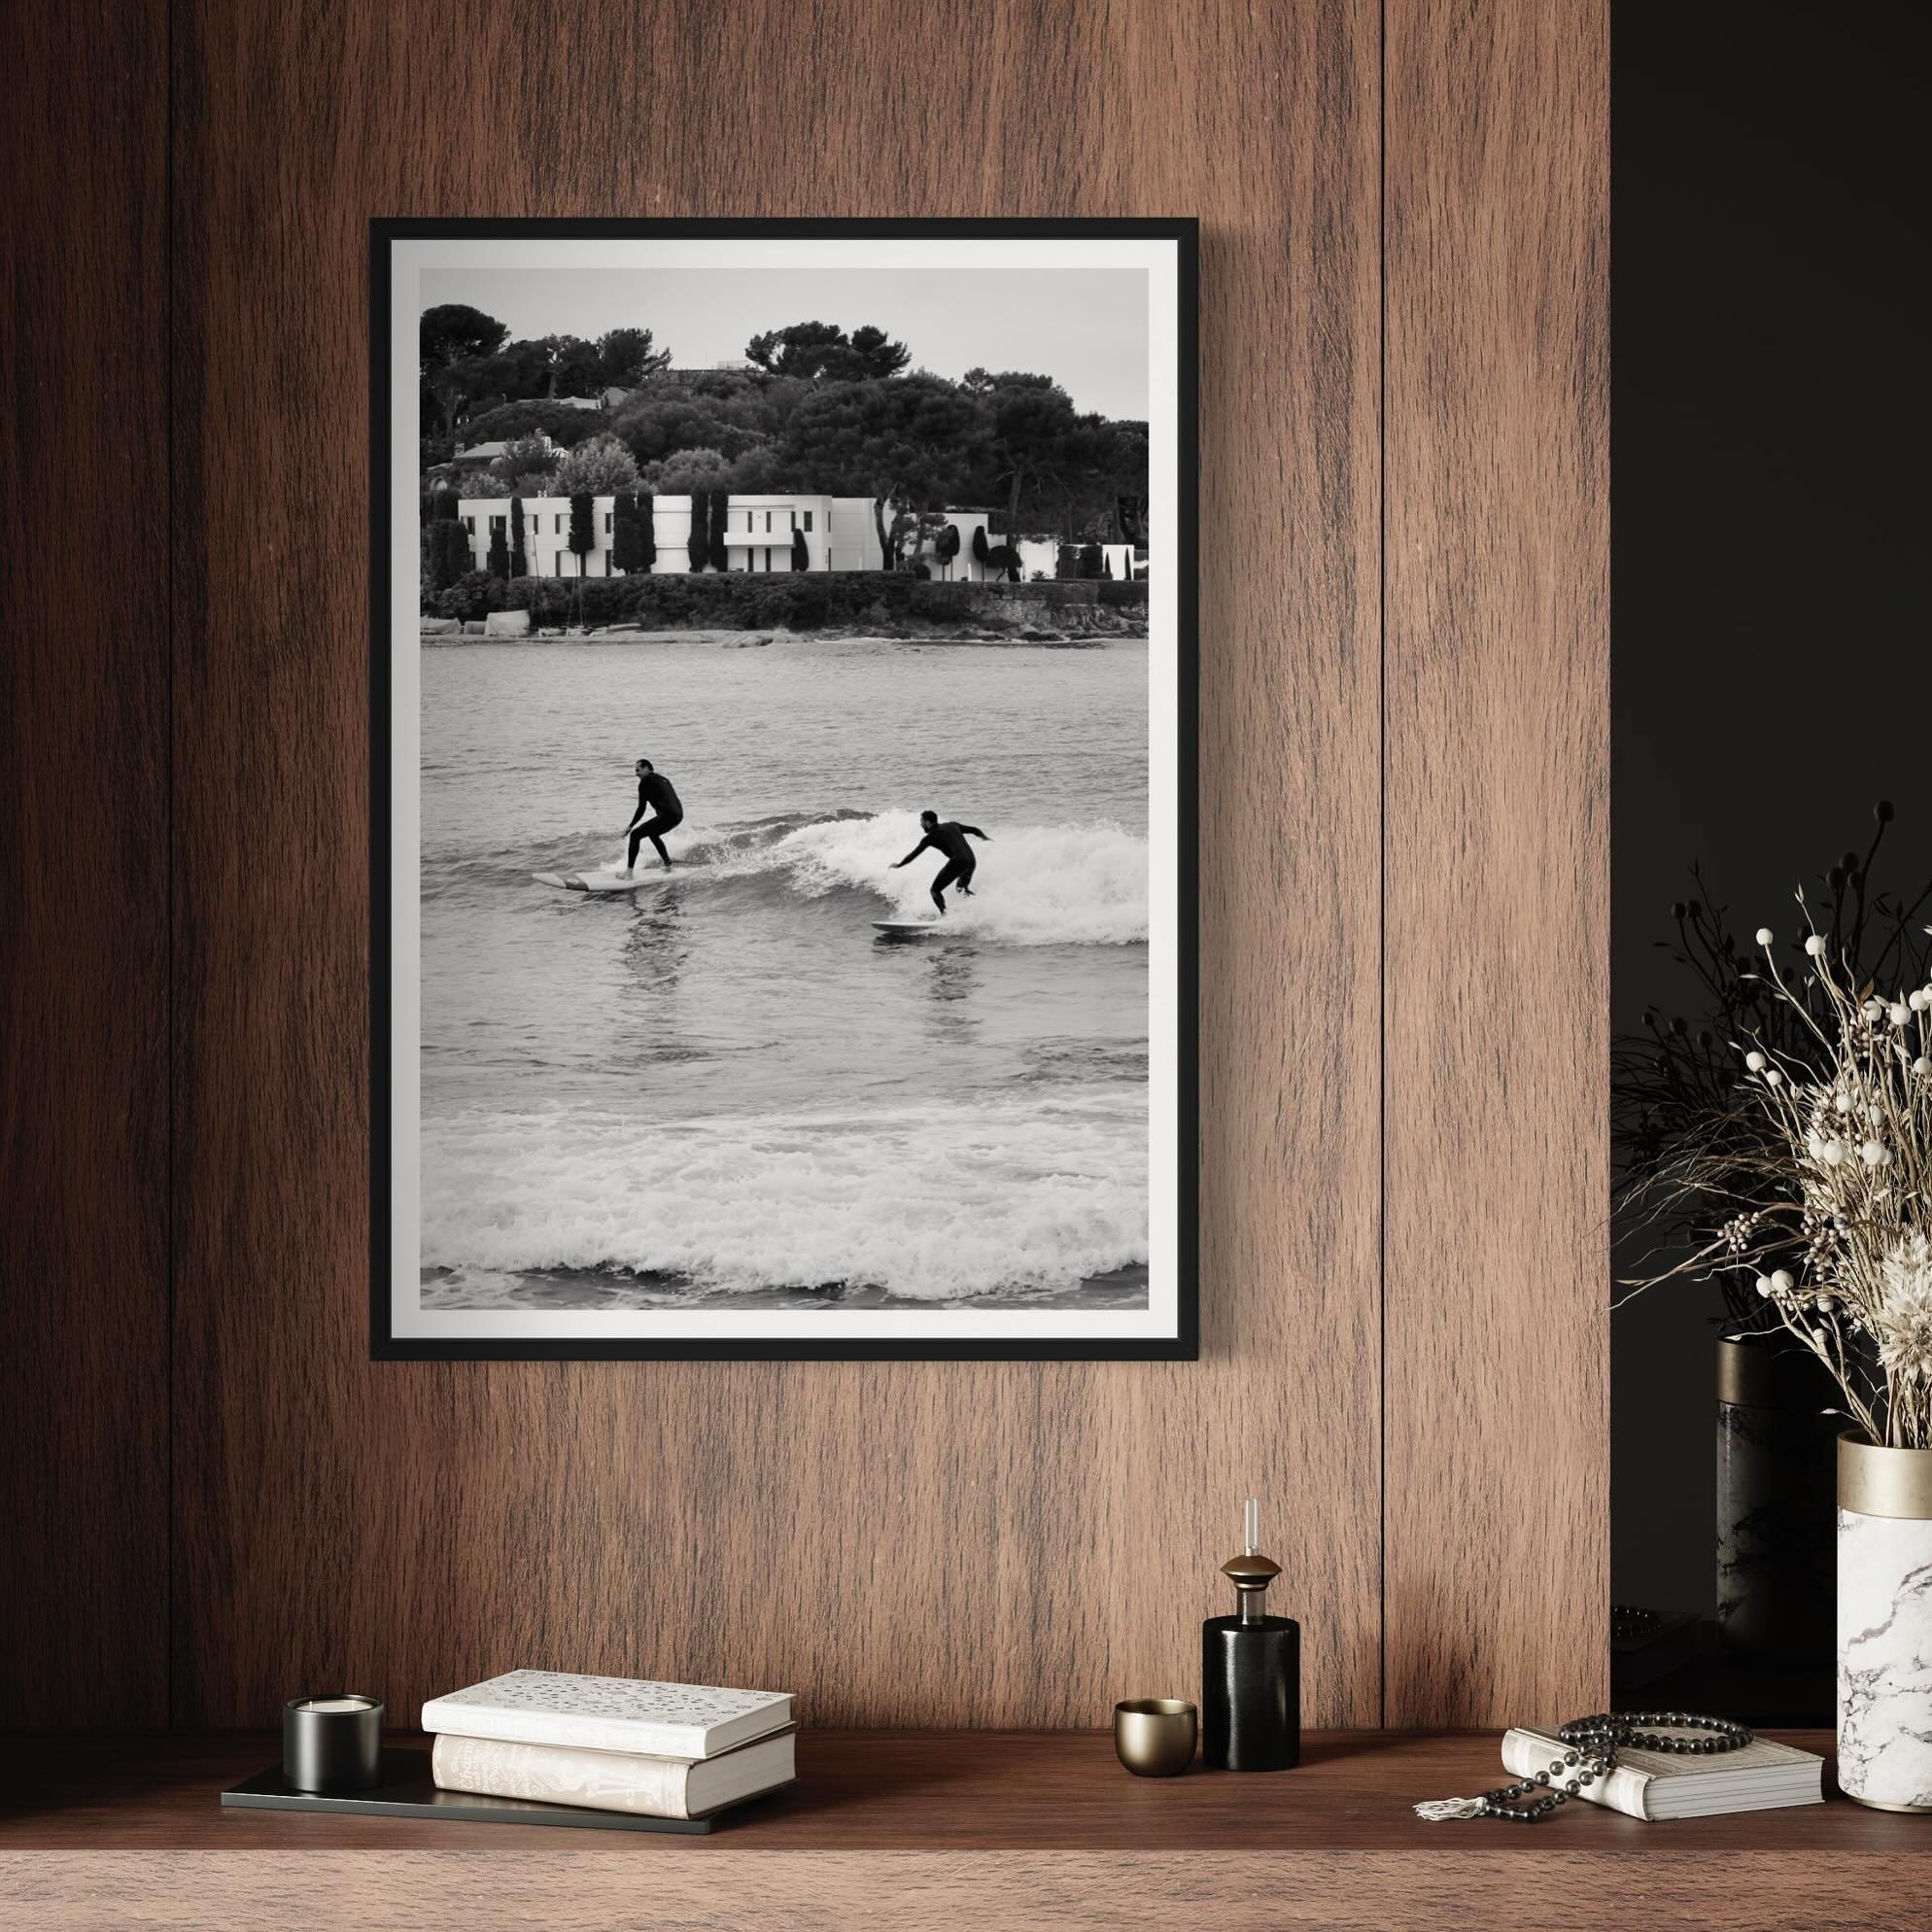 Surfers x Aujourd&rsquo;hui.

Now available in all of the usual sizes. Head over to the website for more information - #linkinbio

#surfing #capdantibes #juanlespins #art #artwork #surf #architecture #waves #ocean #sea #superyacht #cotedazur #frenchr